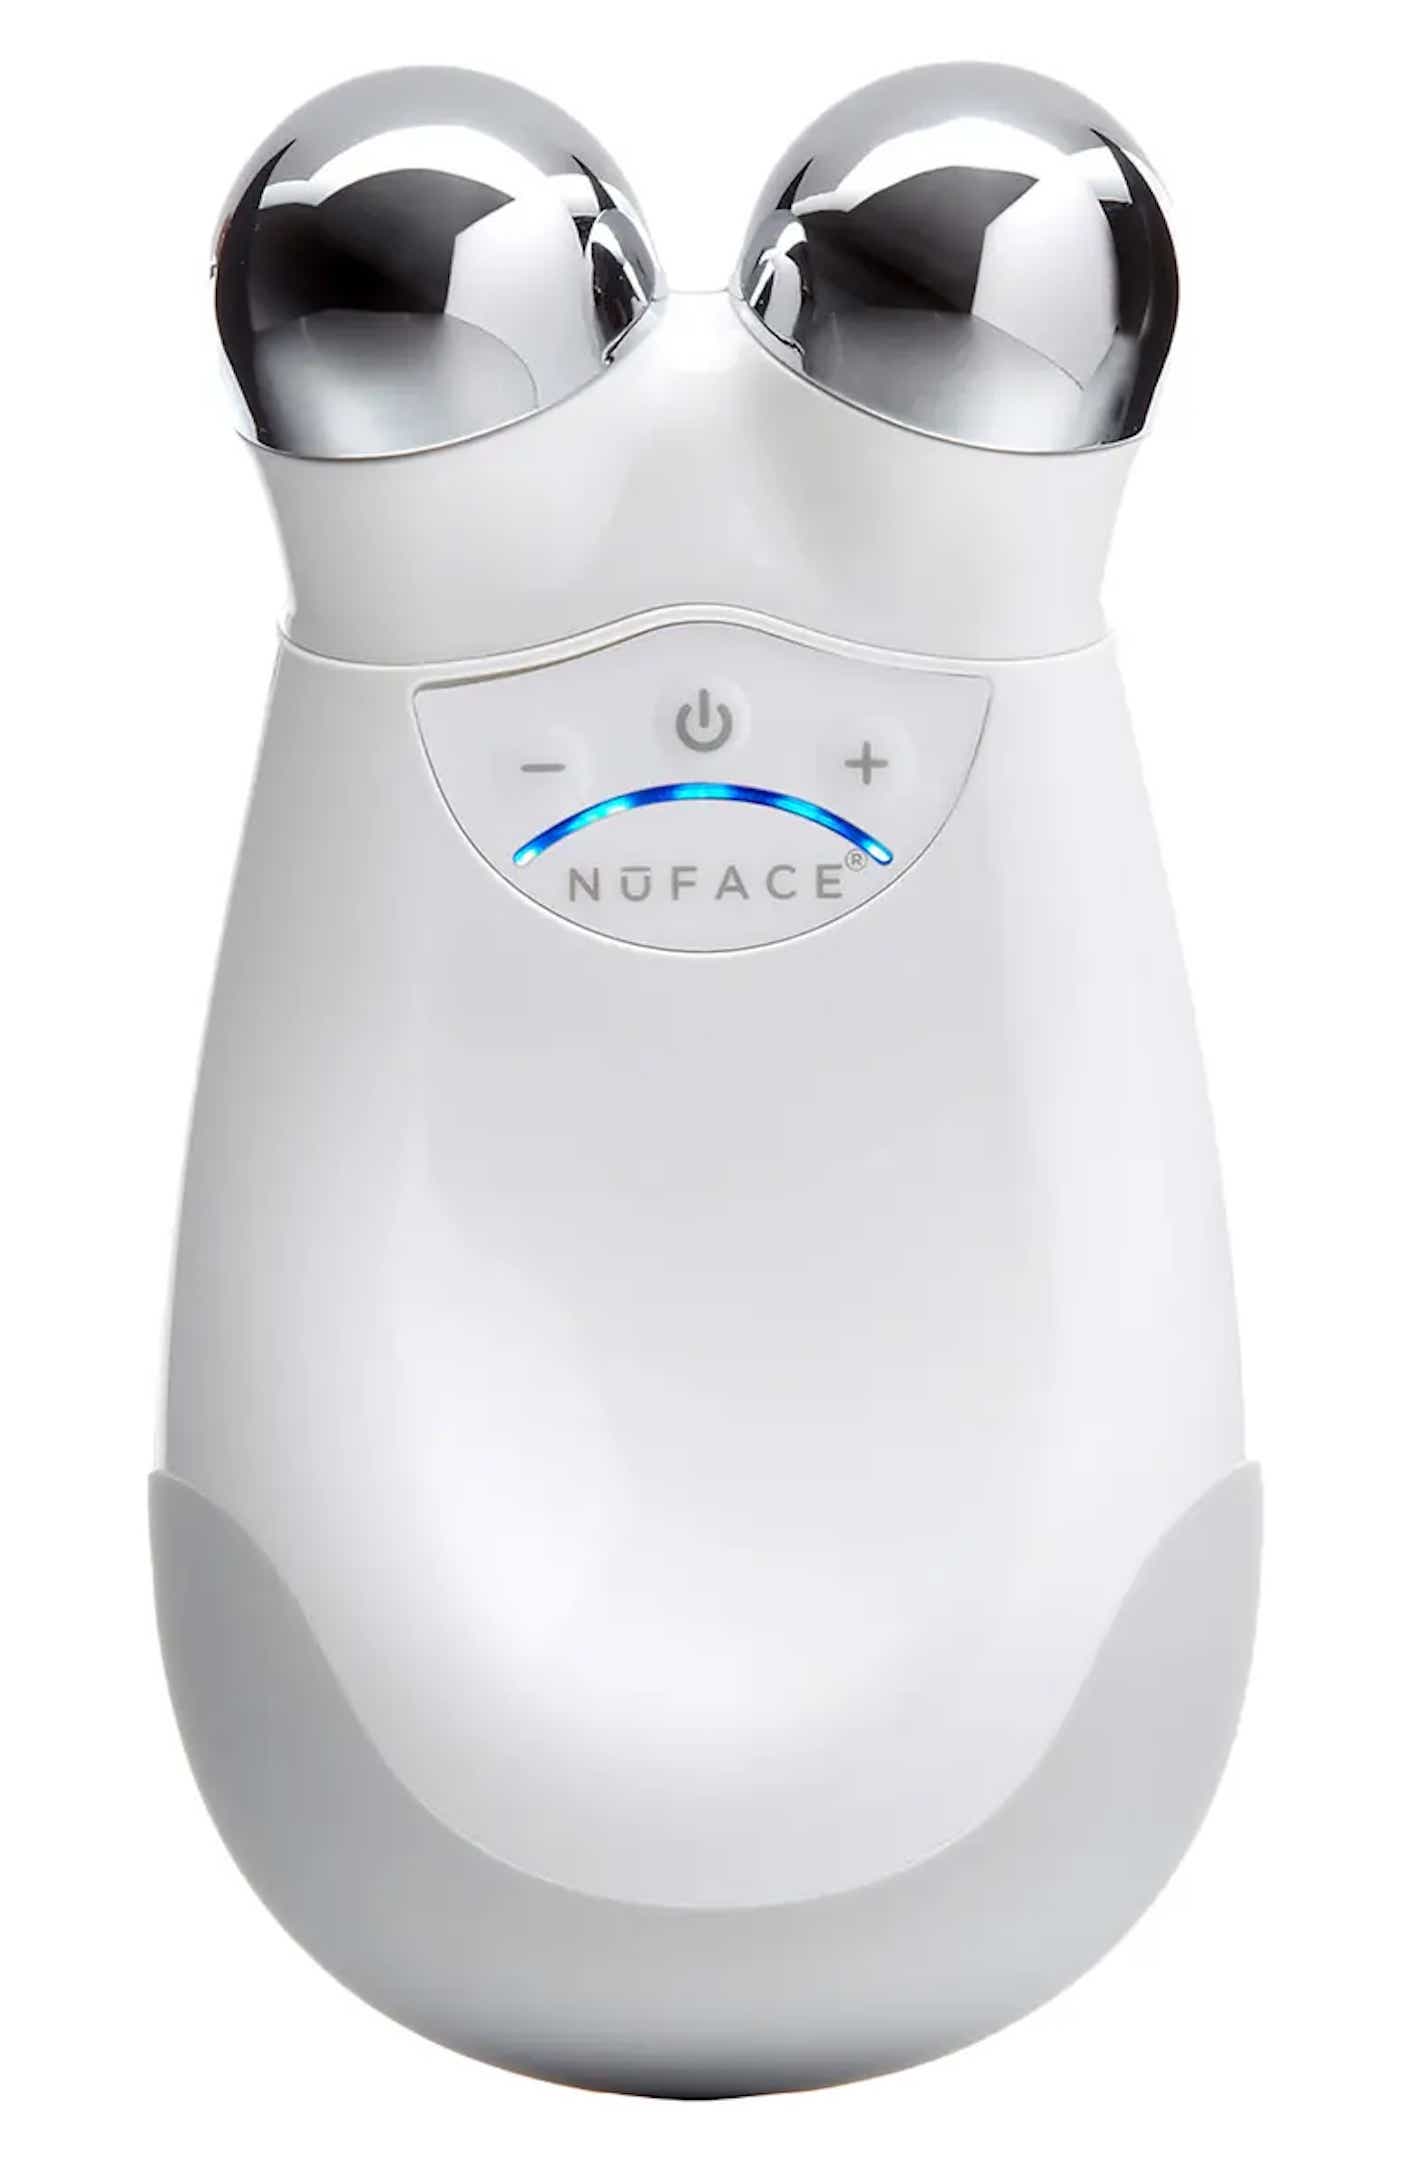 A handheld facial toning device with two spherical metal portions that tone the face is pictured.